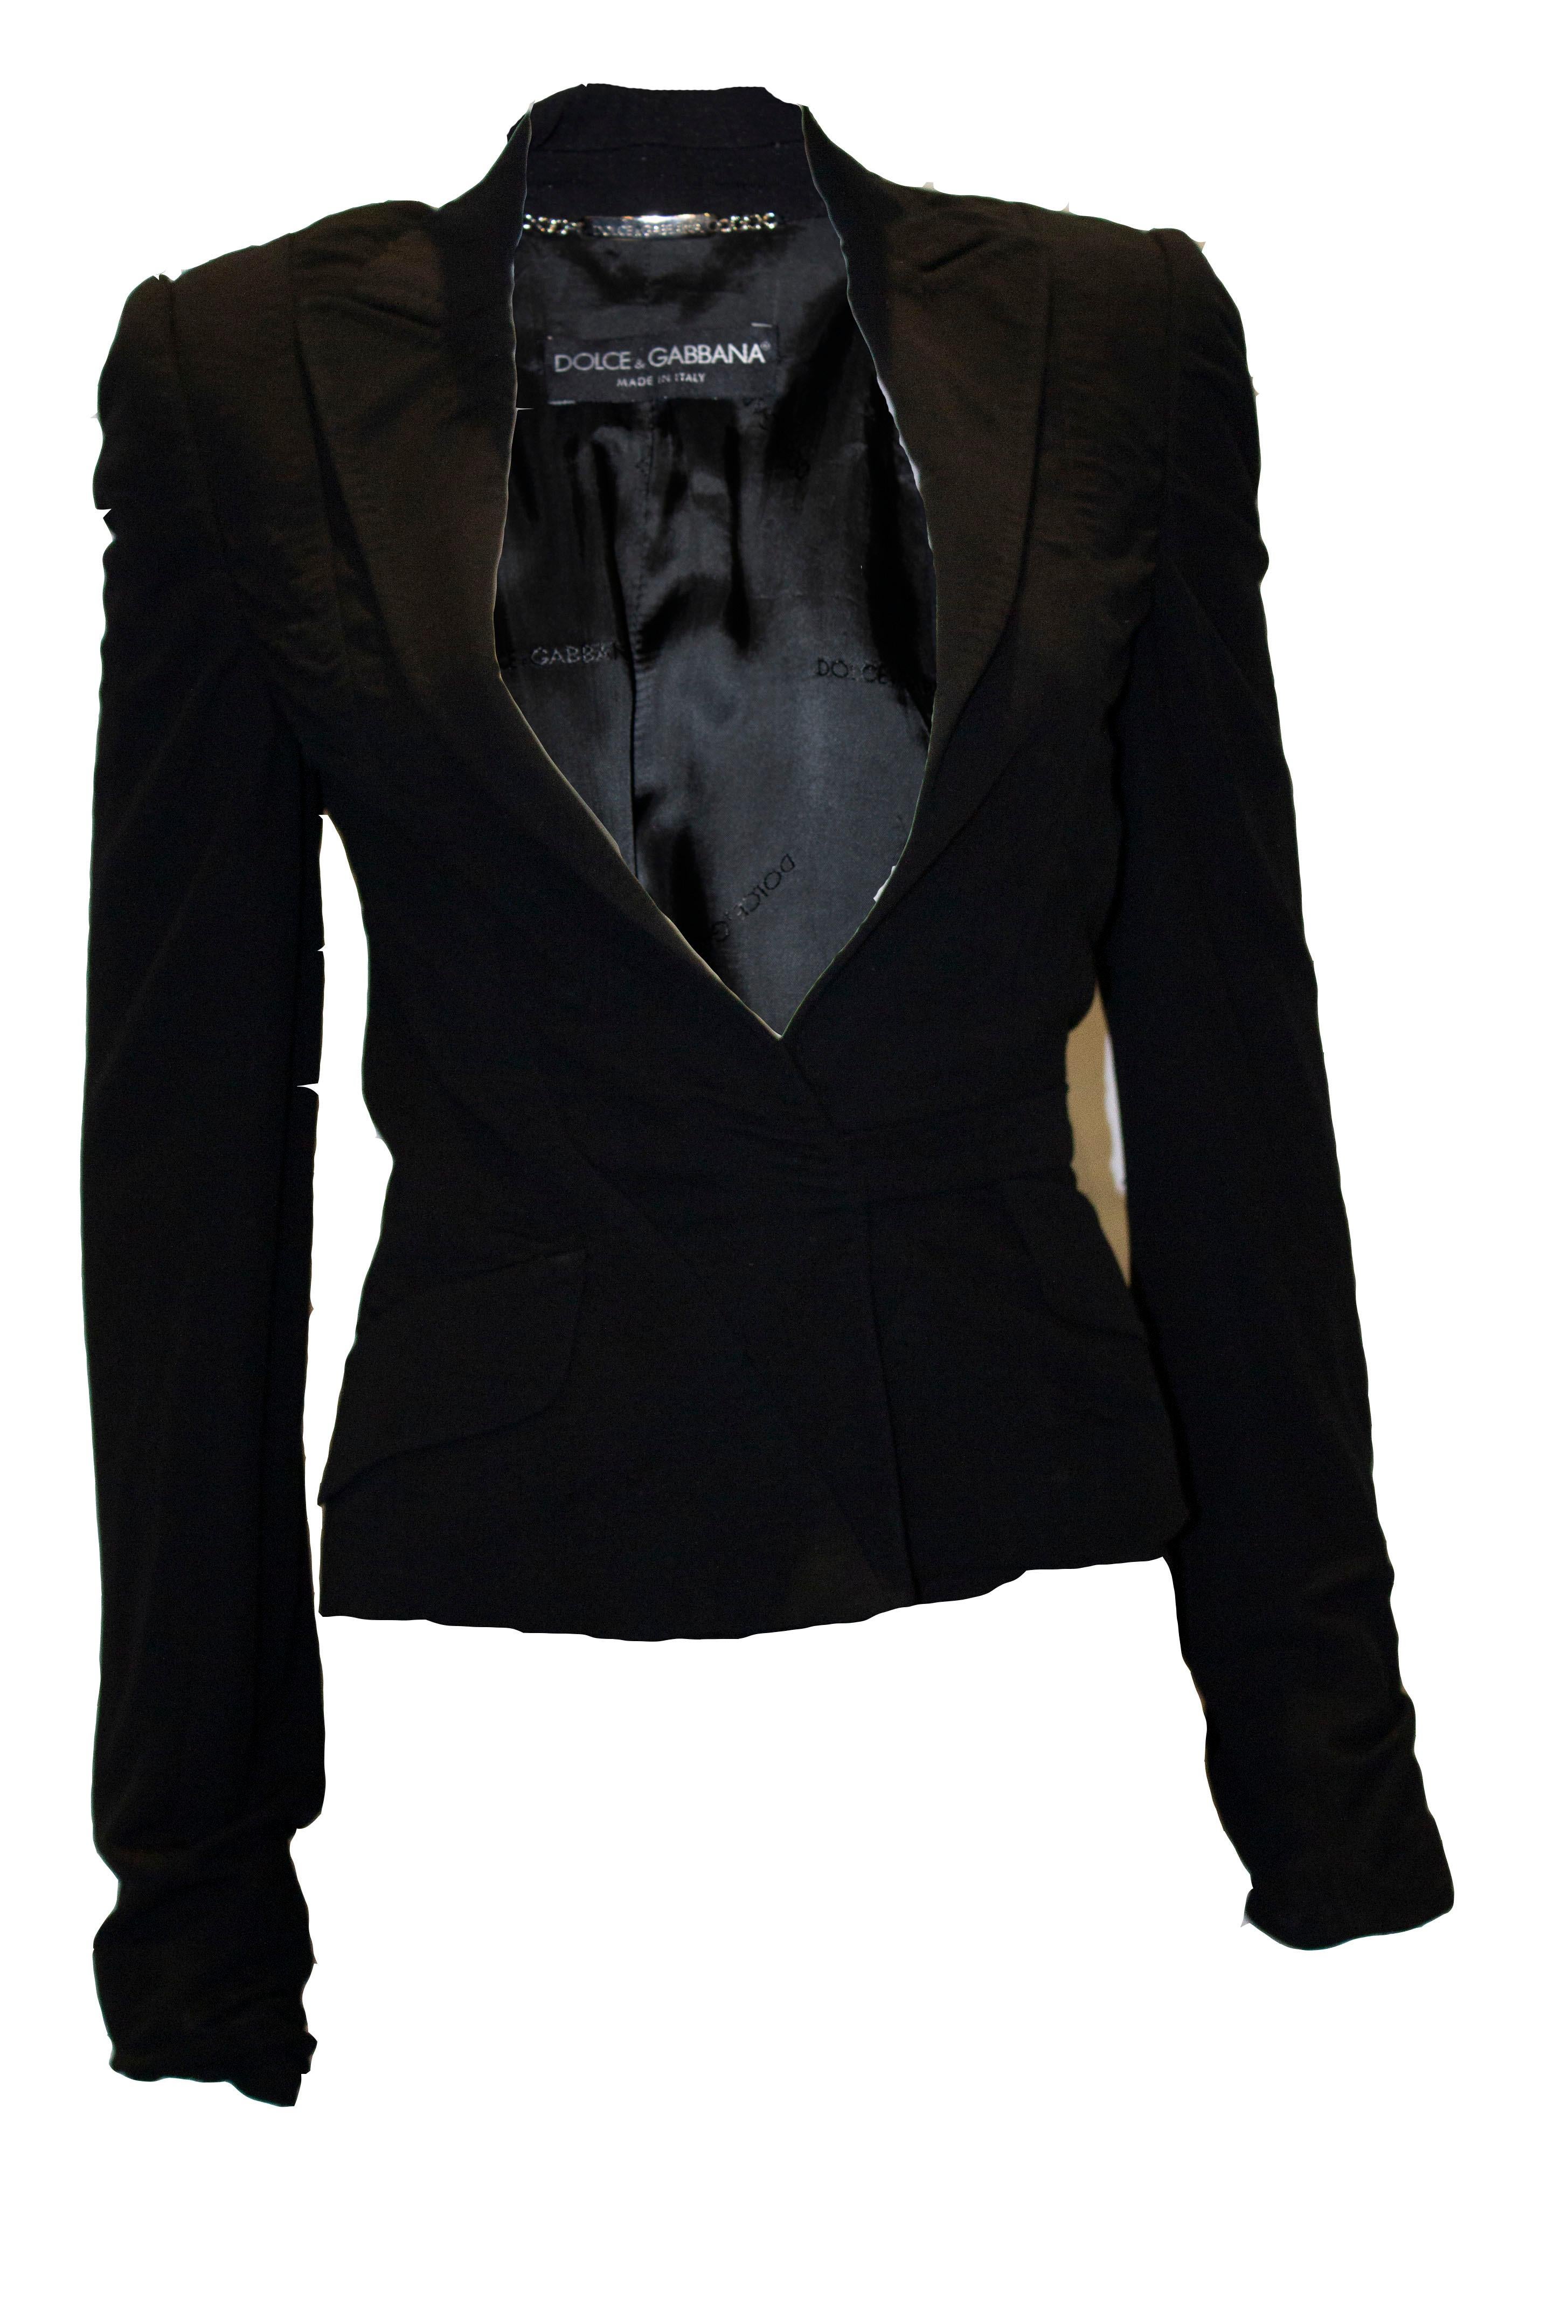 A chic blck jacket by Dolce and Gabanna. The jacket ahas two faux pocket flaps and an uusual wrap around tie belt. It is a rayon, nylon and spandex mix.